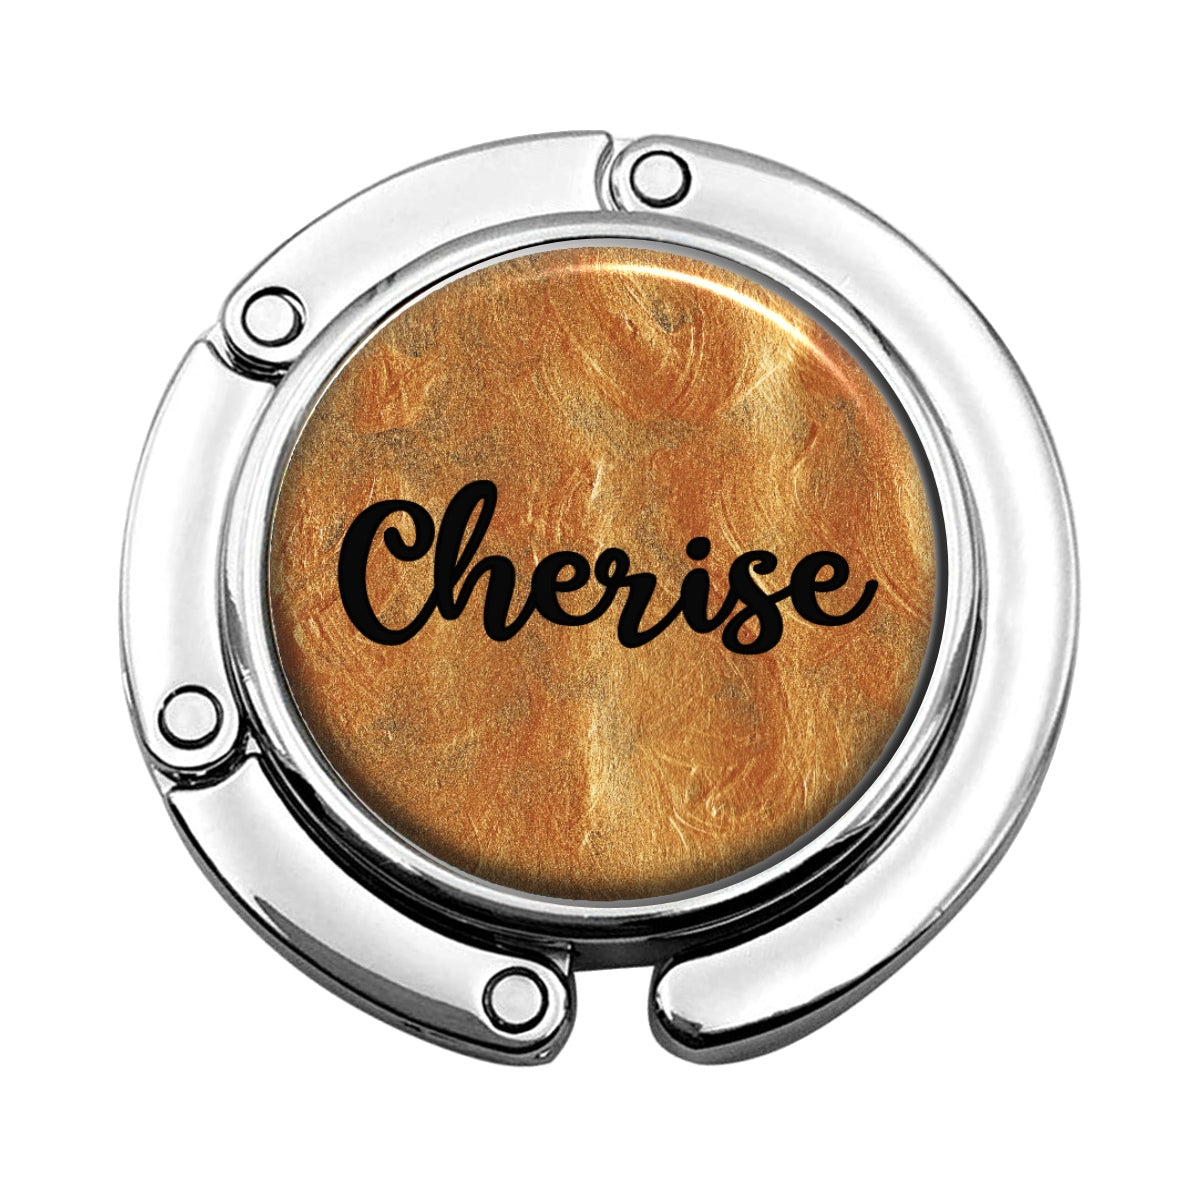 a close up of a metal object with the word cherse on it